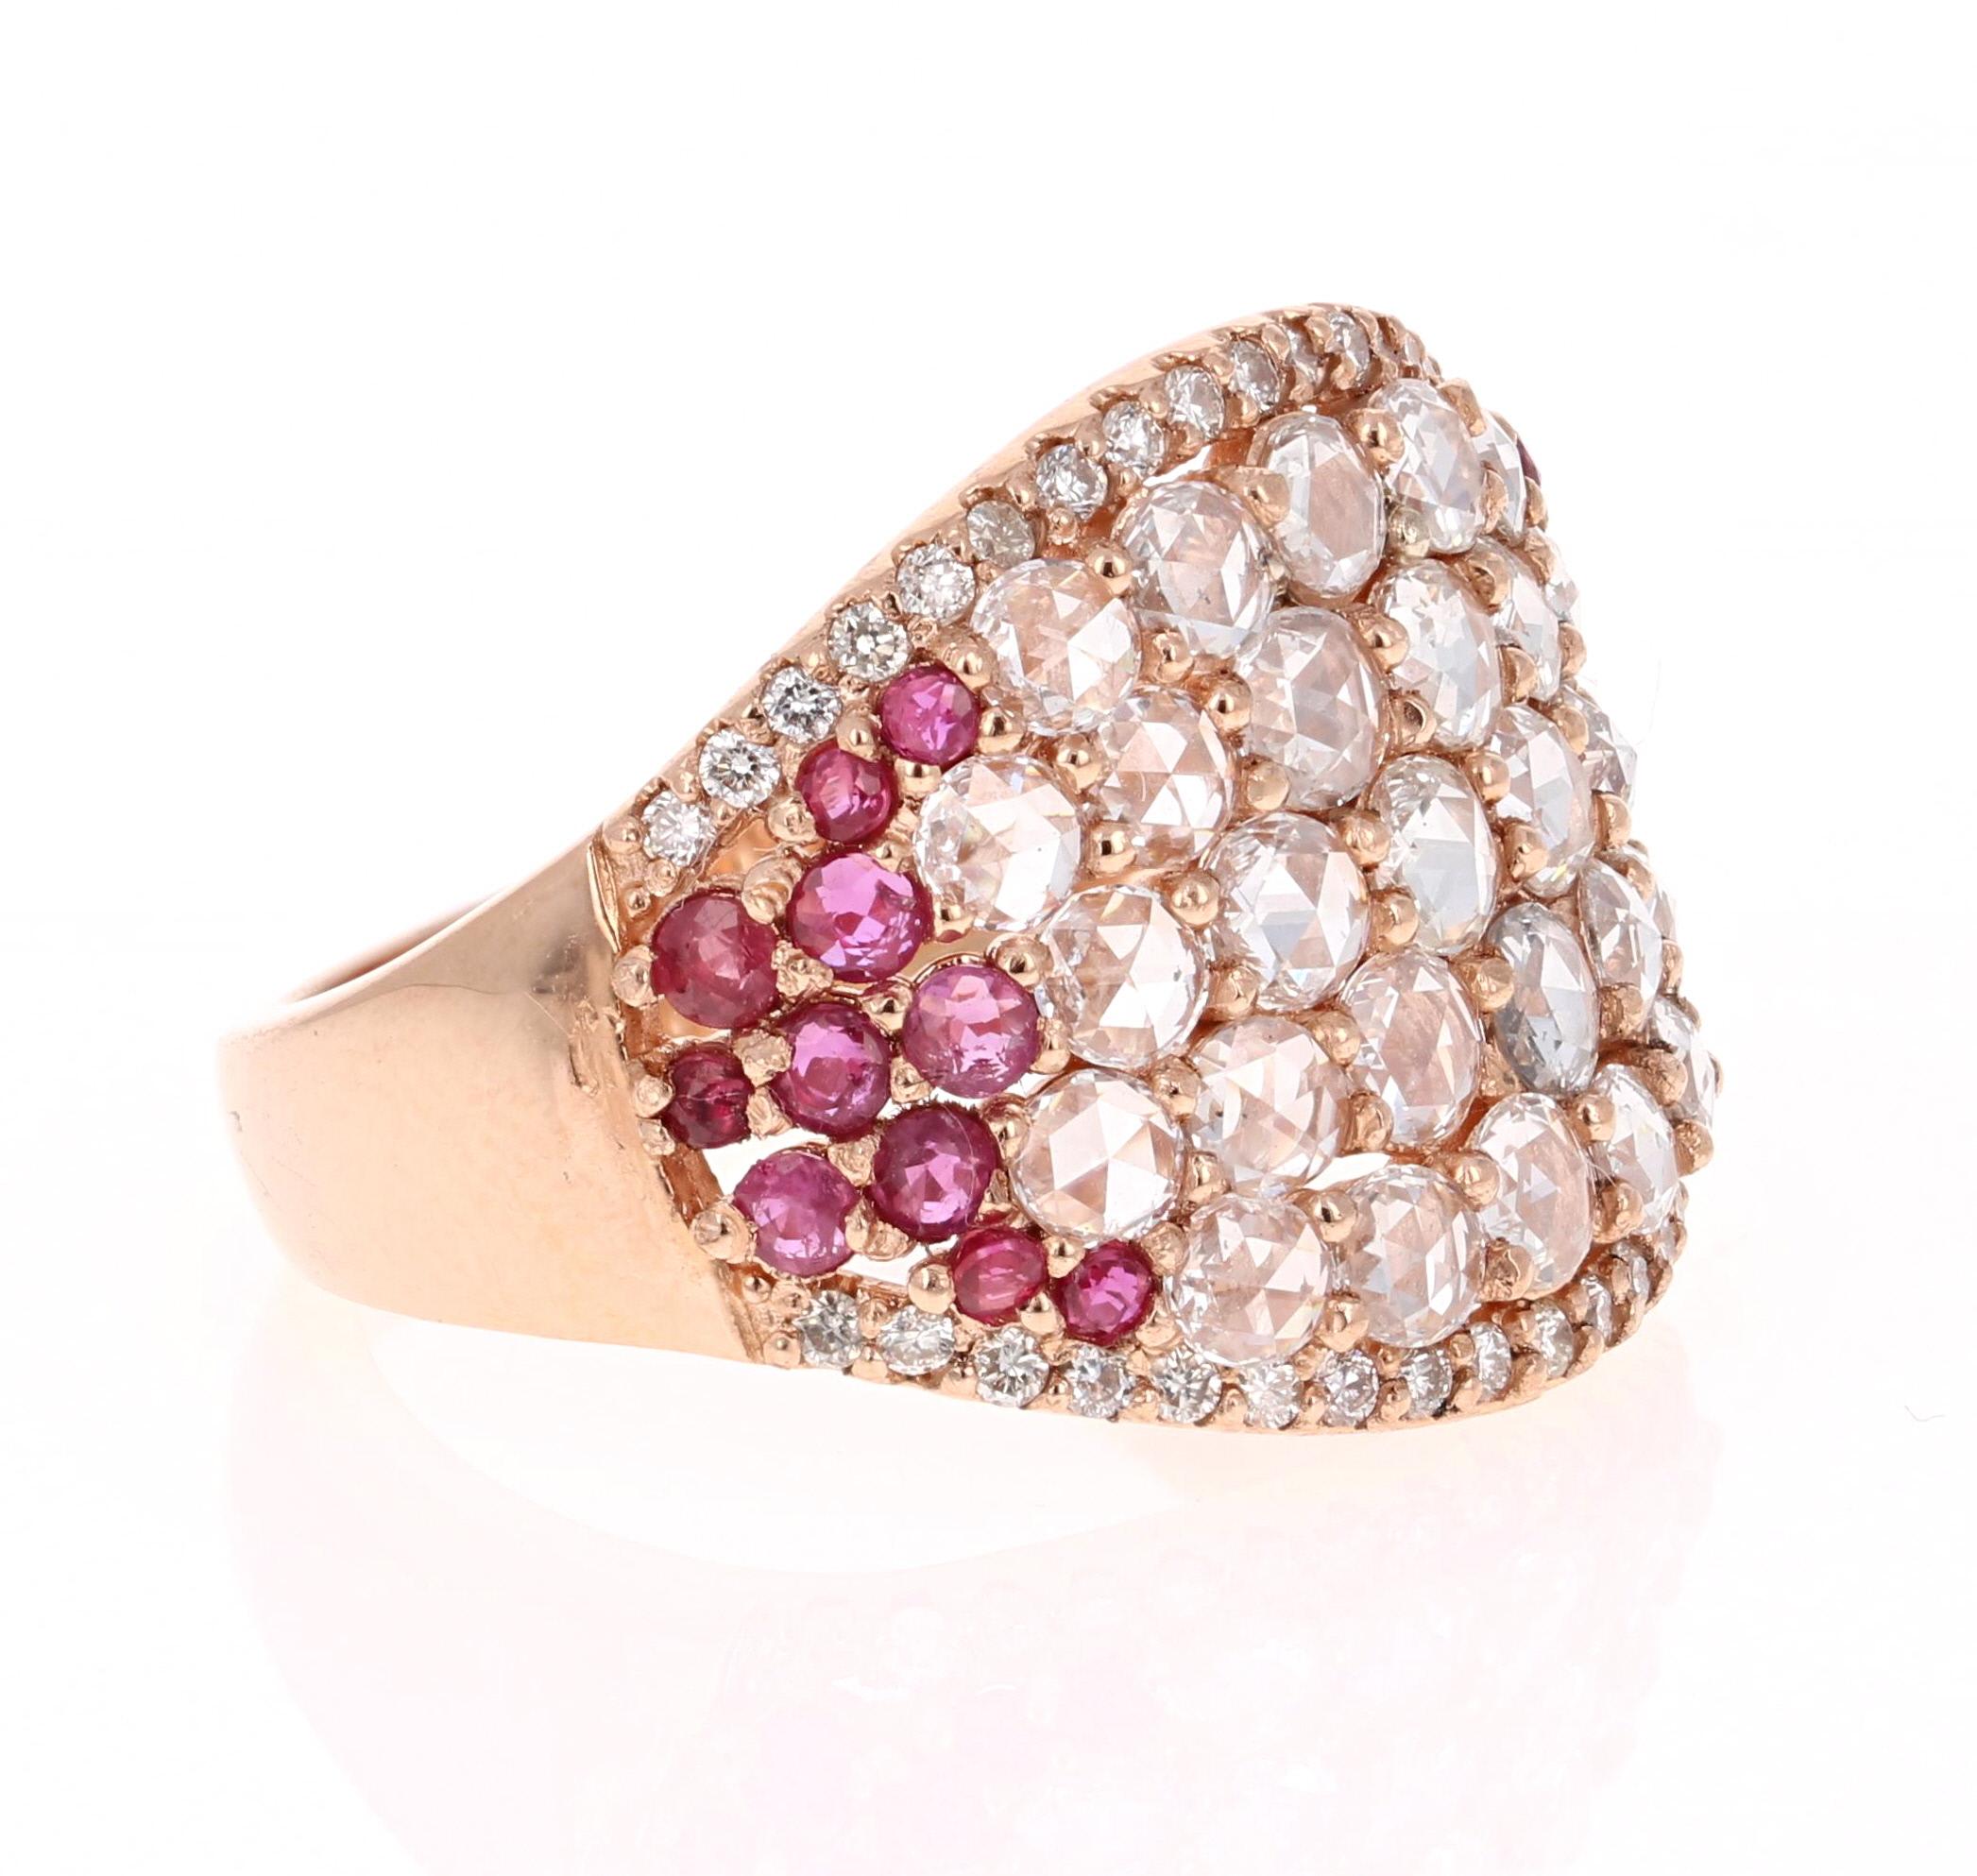 
This ring has 28 stunning Rose Cut Diamonds that weigh 1.41 Carats and has 23 Round Cut Rubies that weigh 0.80 Carats. It is further embellished with 38 Round Cut Diamonds that weigh 0.26 Carats. The Total Carat Weight of the Ring is 2.47 Carats.